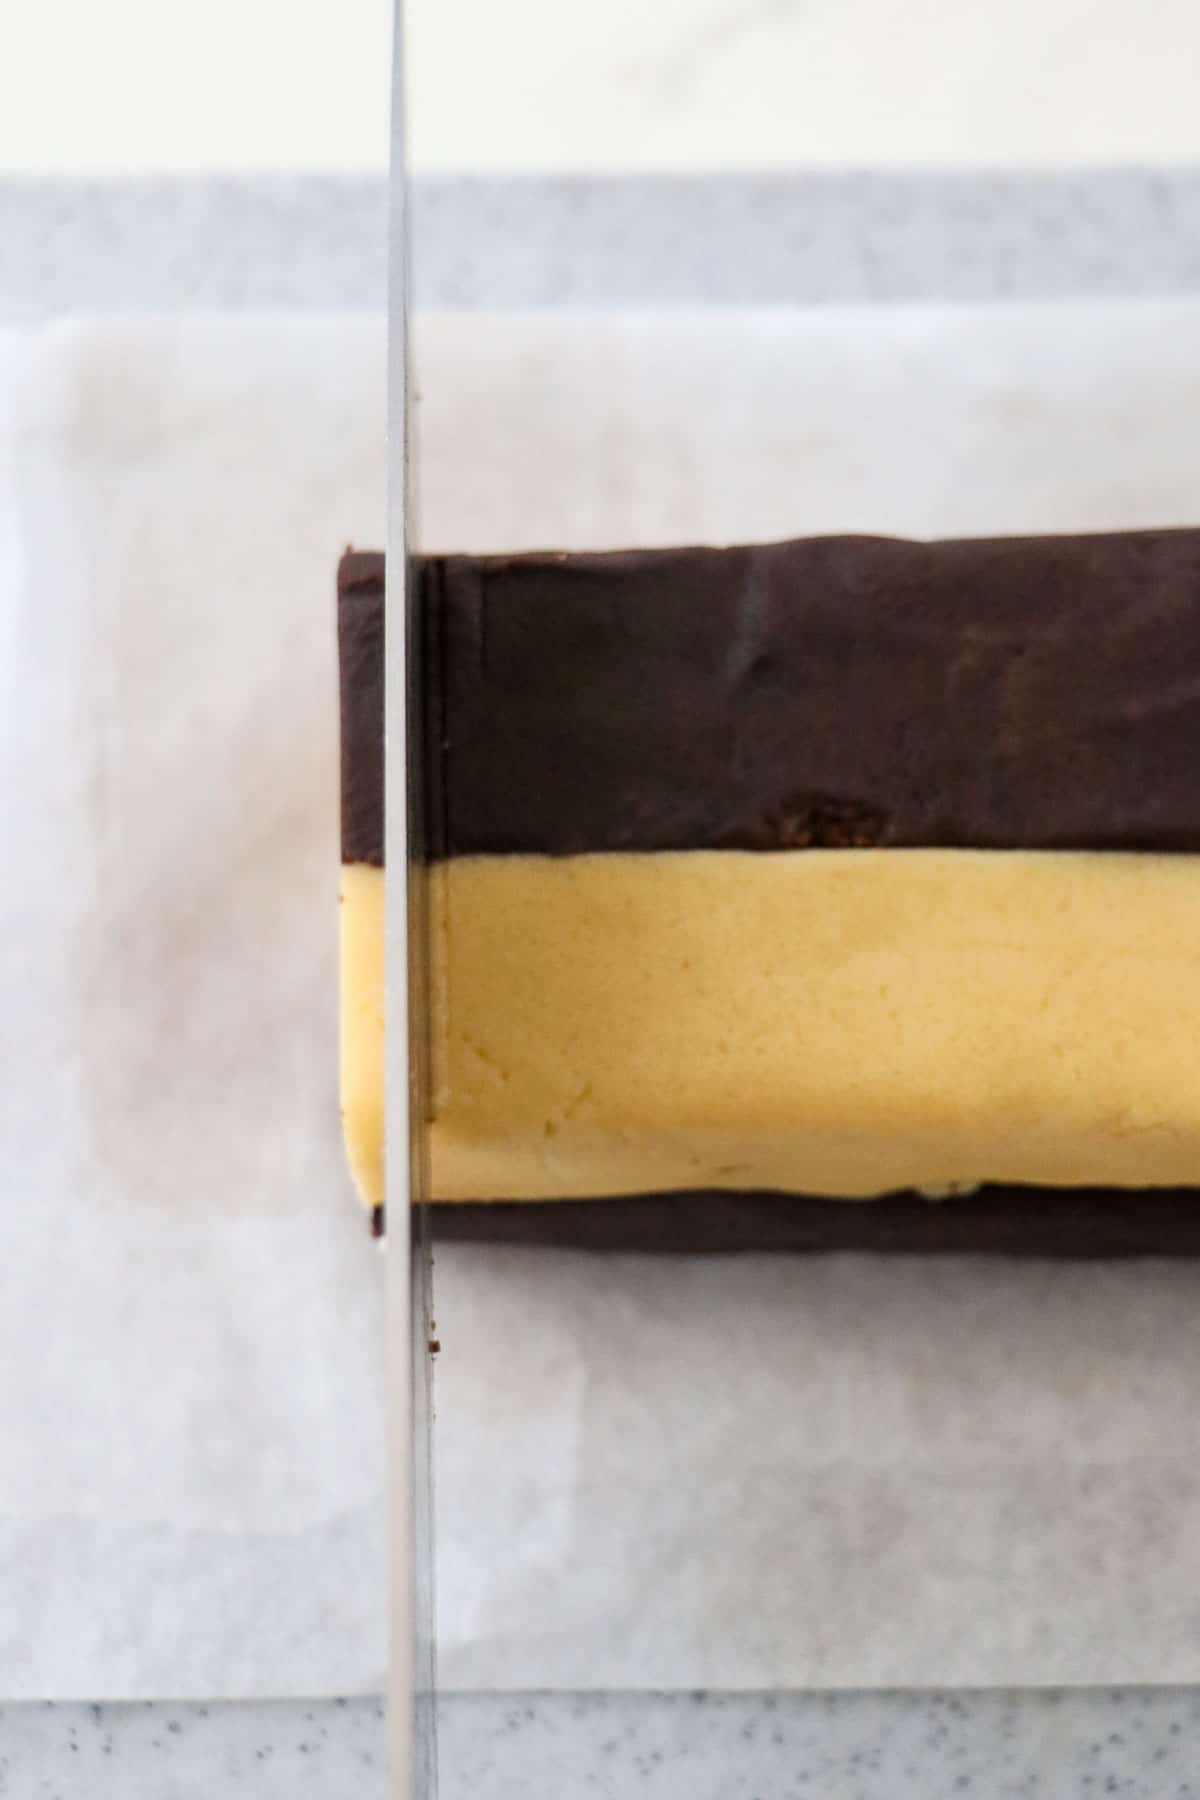 Knife cutting into checkerboard cookie dough.